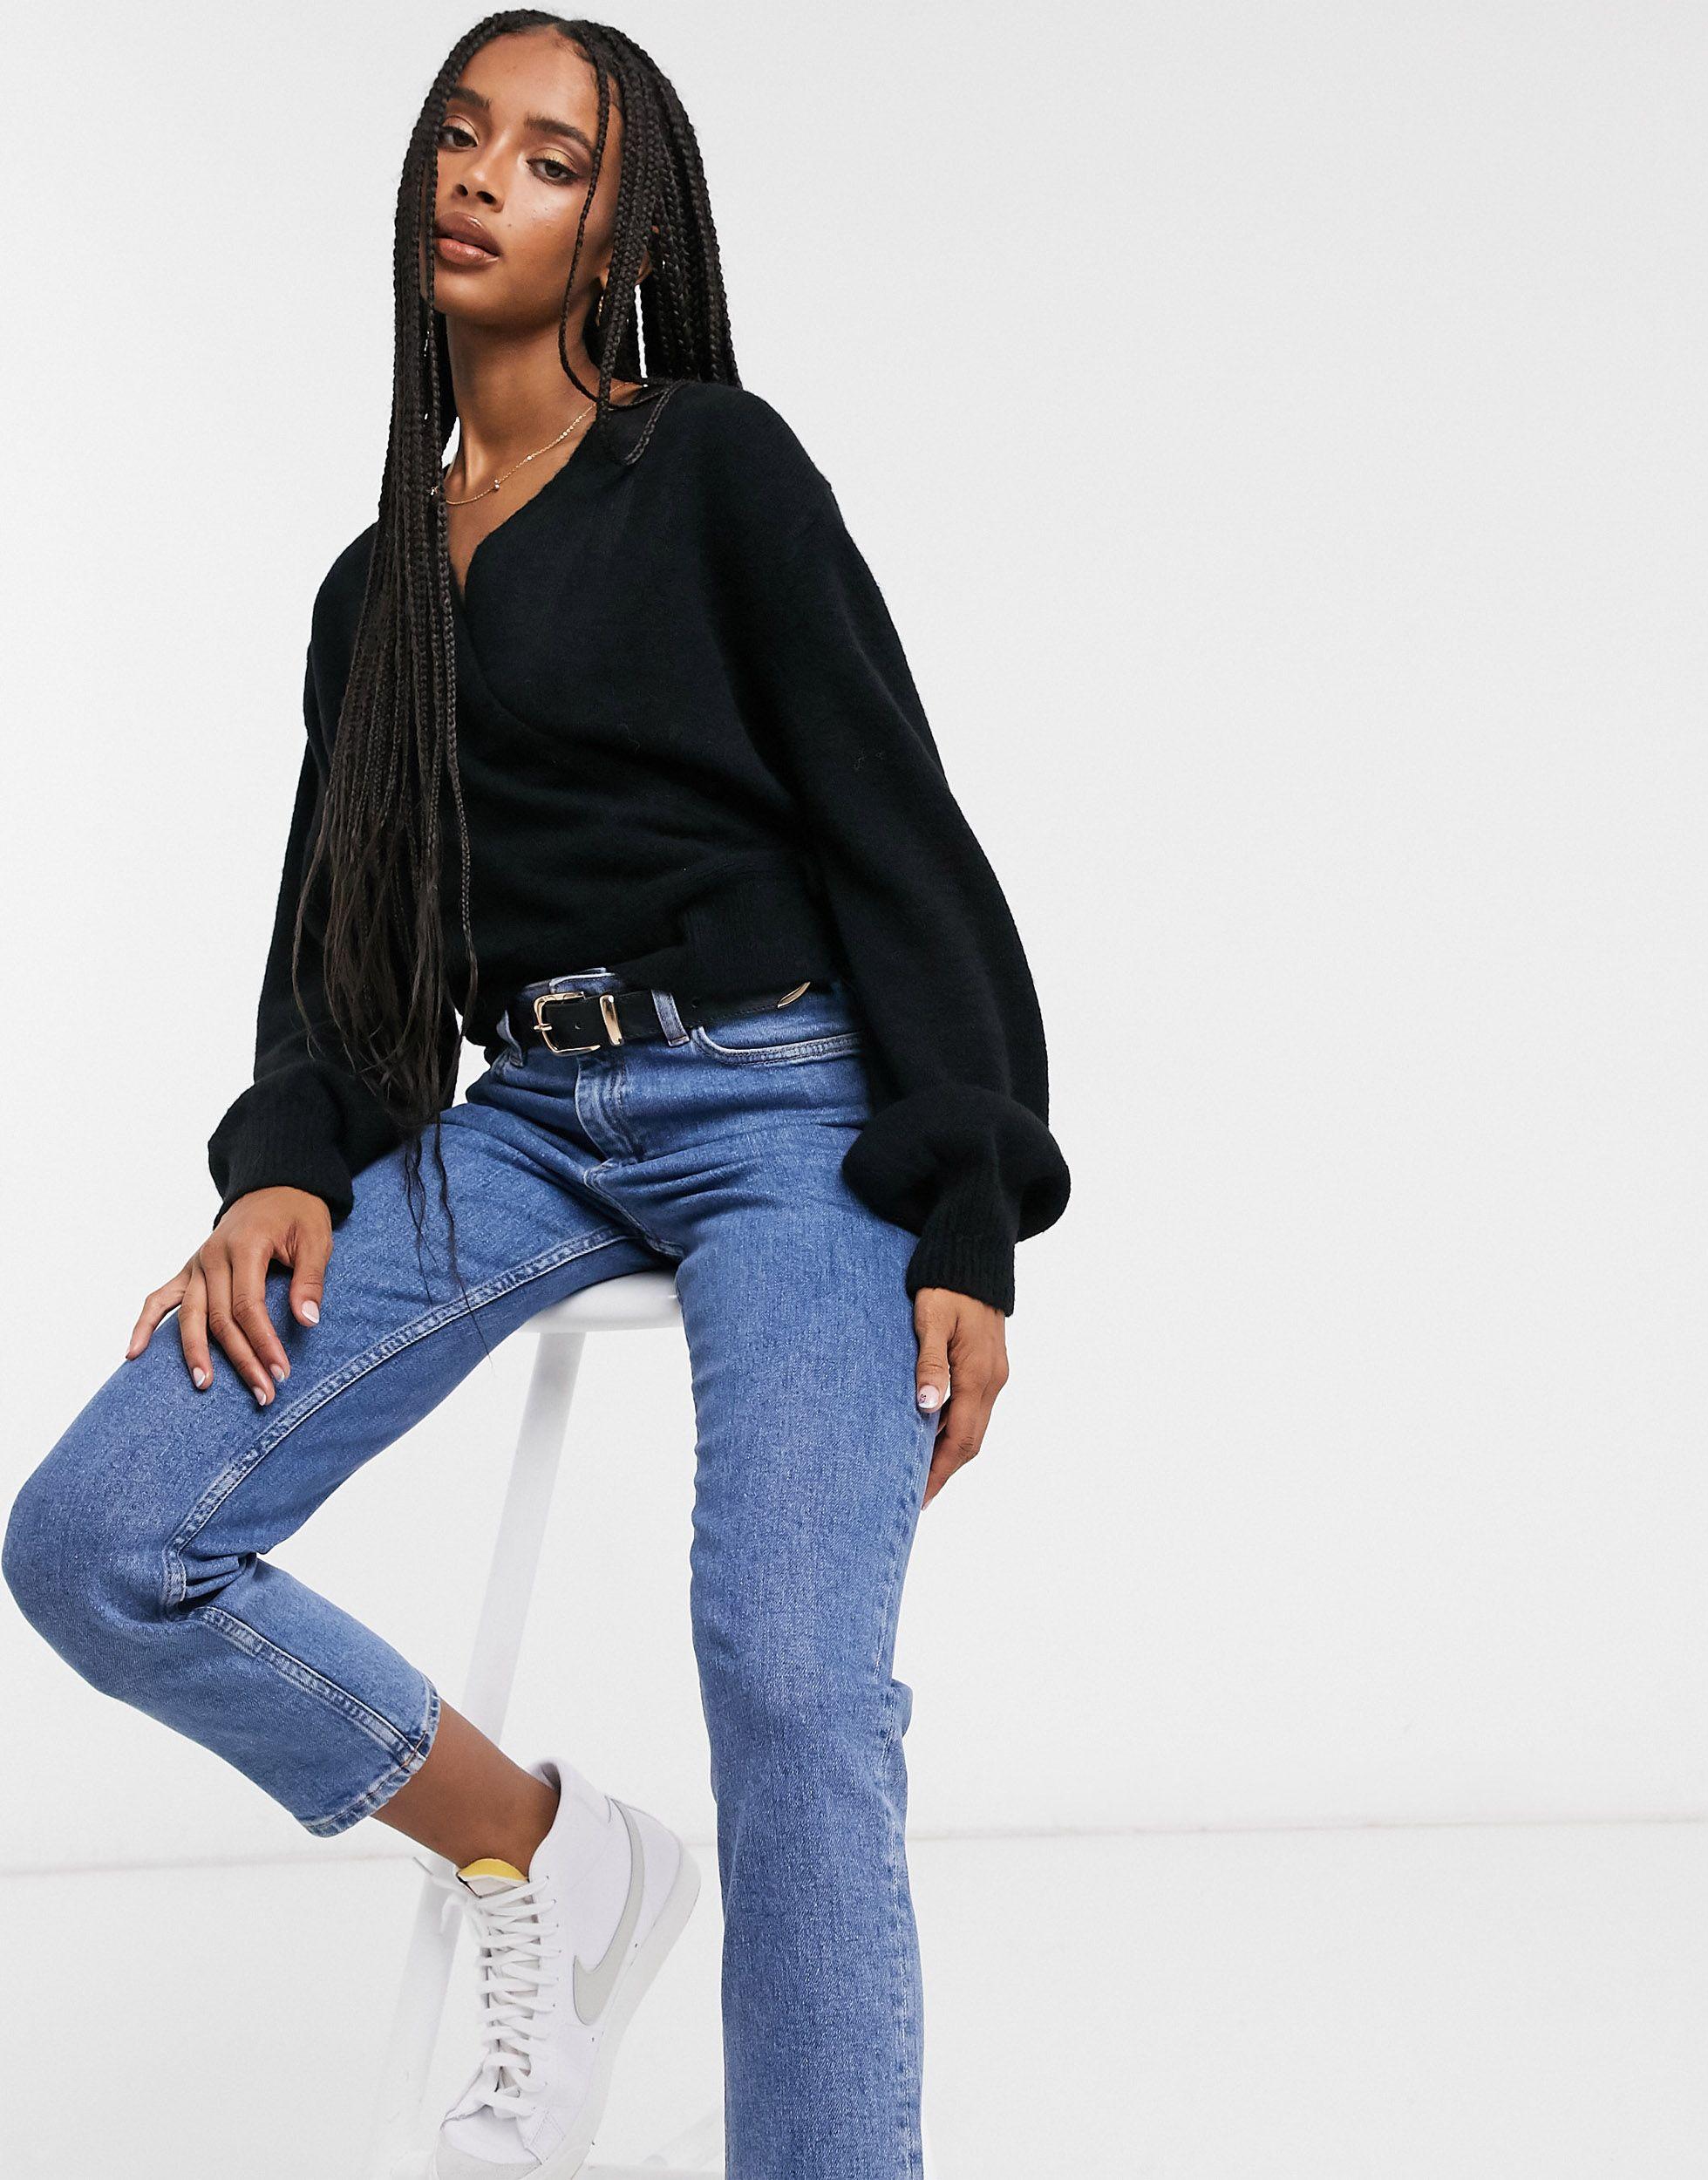 & Other Stories Wrap Cardigan in Black - Save 38% - Lyst